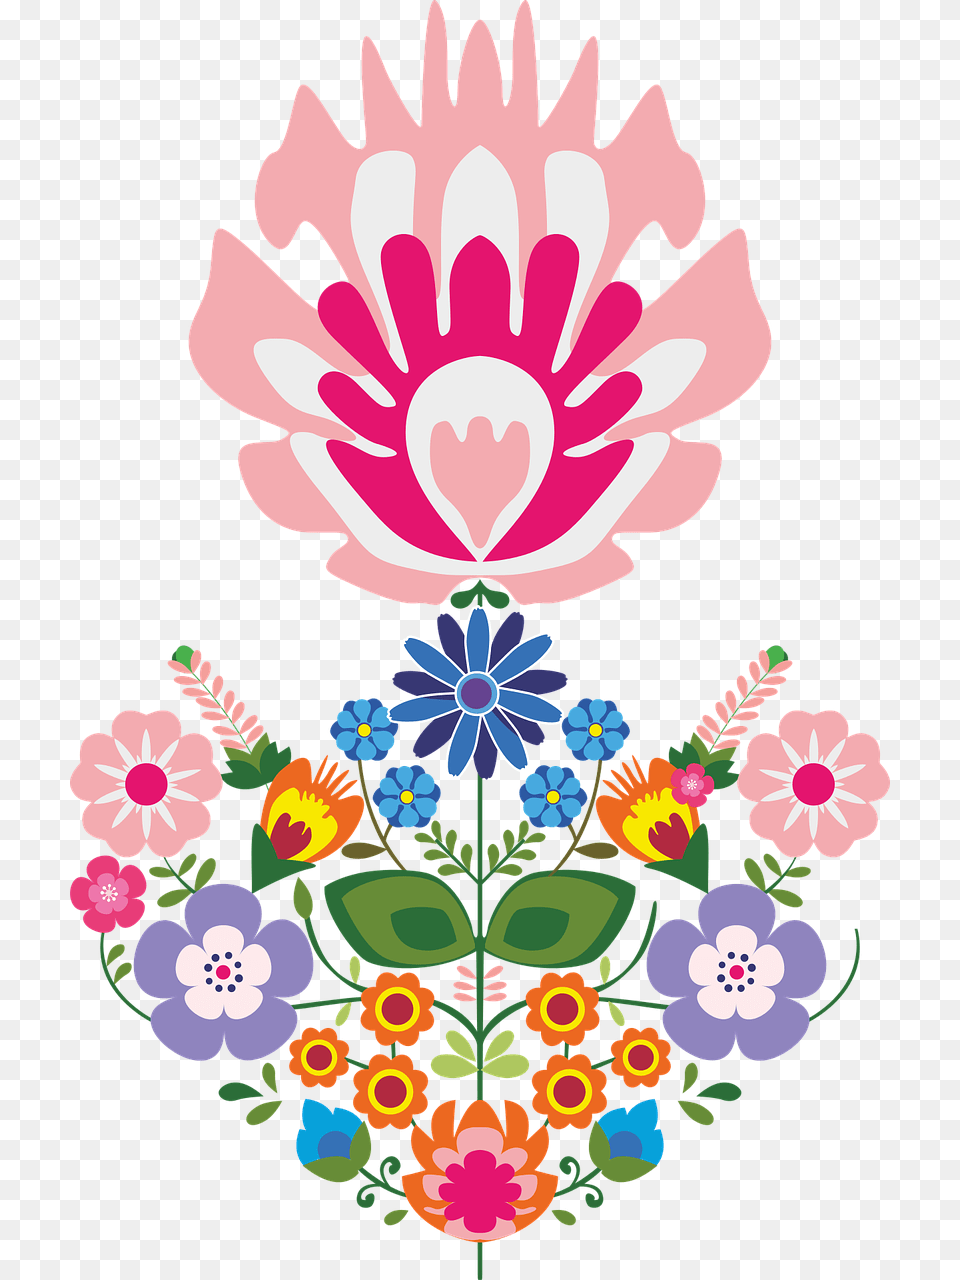 Flower Illustration Ornament Abstract Floral Flower Illustration Abstract, Art, Dahlia, Floral Design, Graphics Free Png